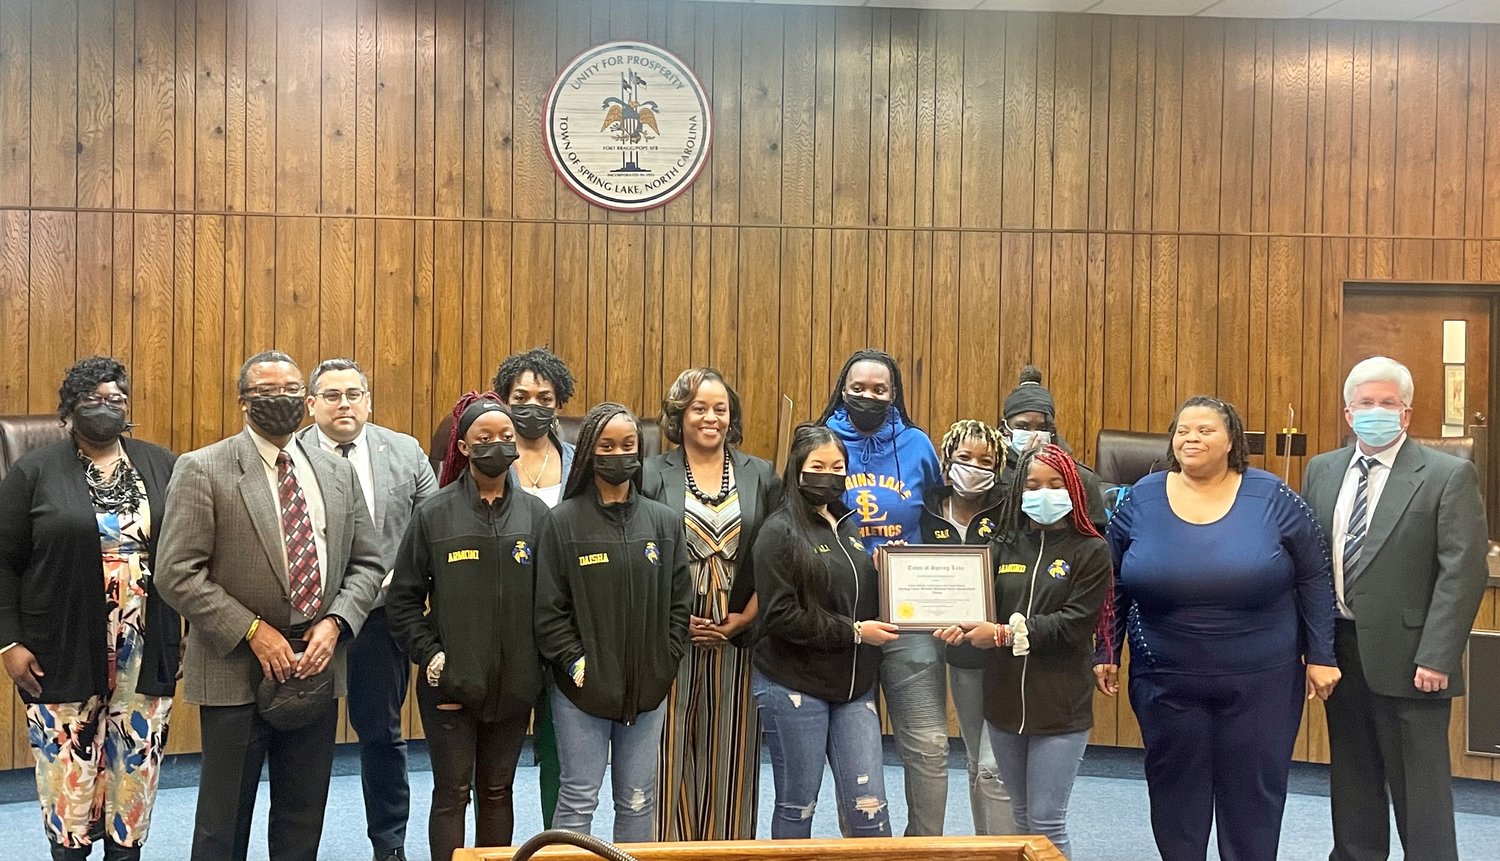 The girls' basketball team at Spring Lake Middle School was recognized Monday night by the Spring Lake Board of Aldermen for winning their Division III Championship.